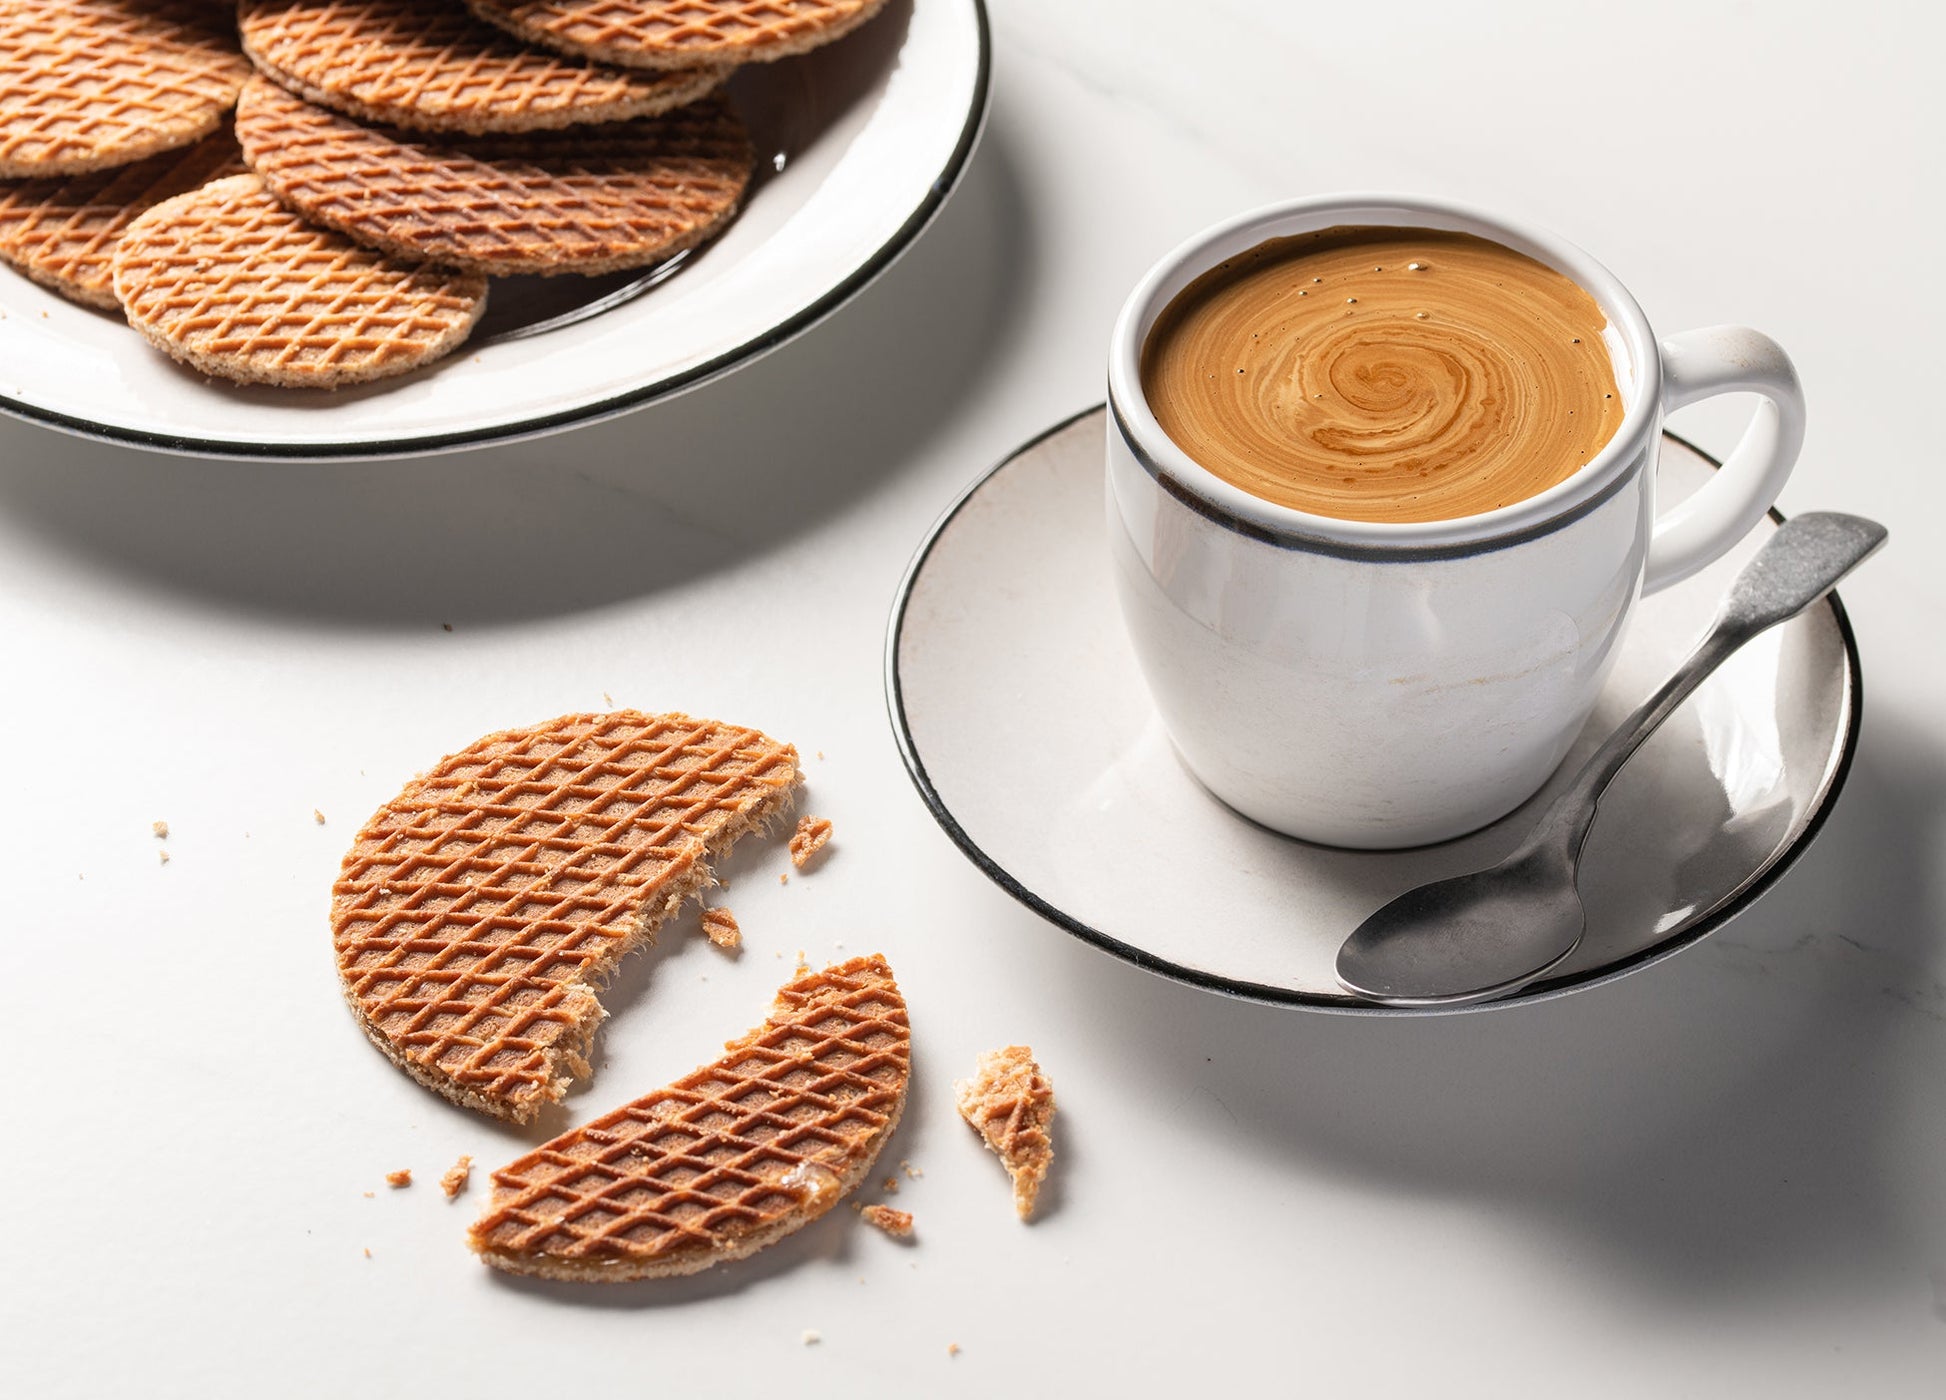 A cup of coffee and Wonderen Stroopwafels Gluten Free Stroopwafels on a white plate.